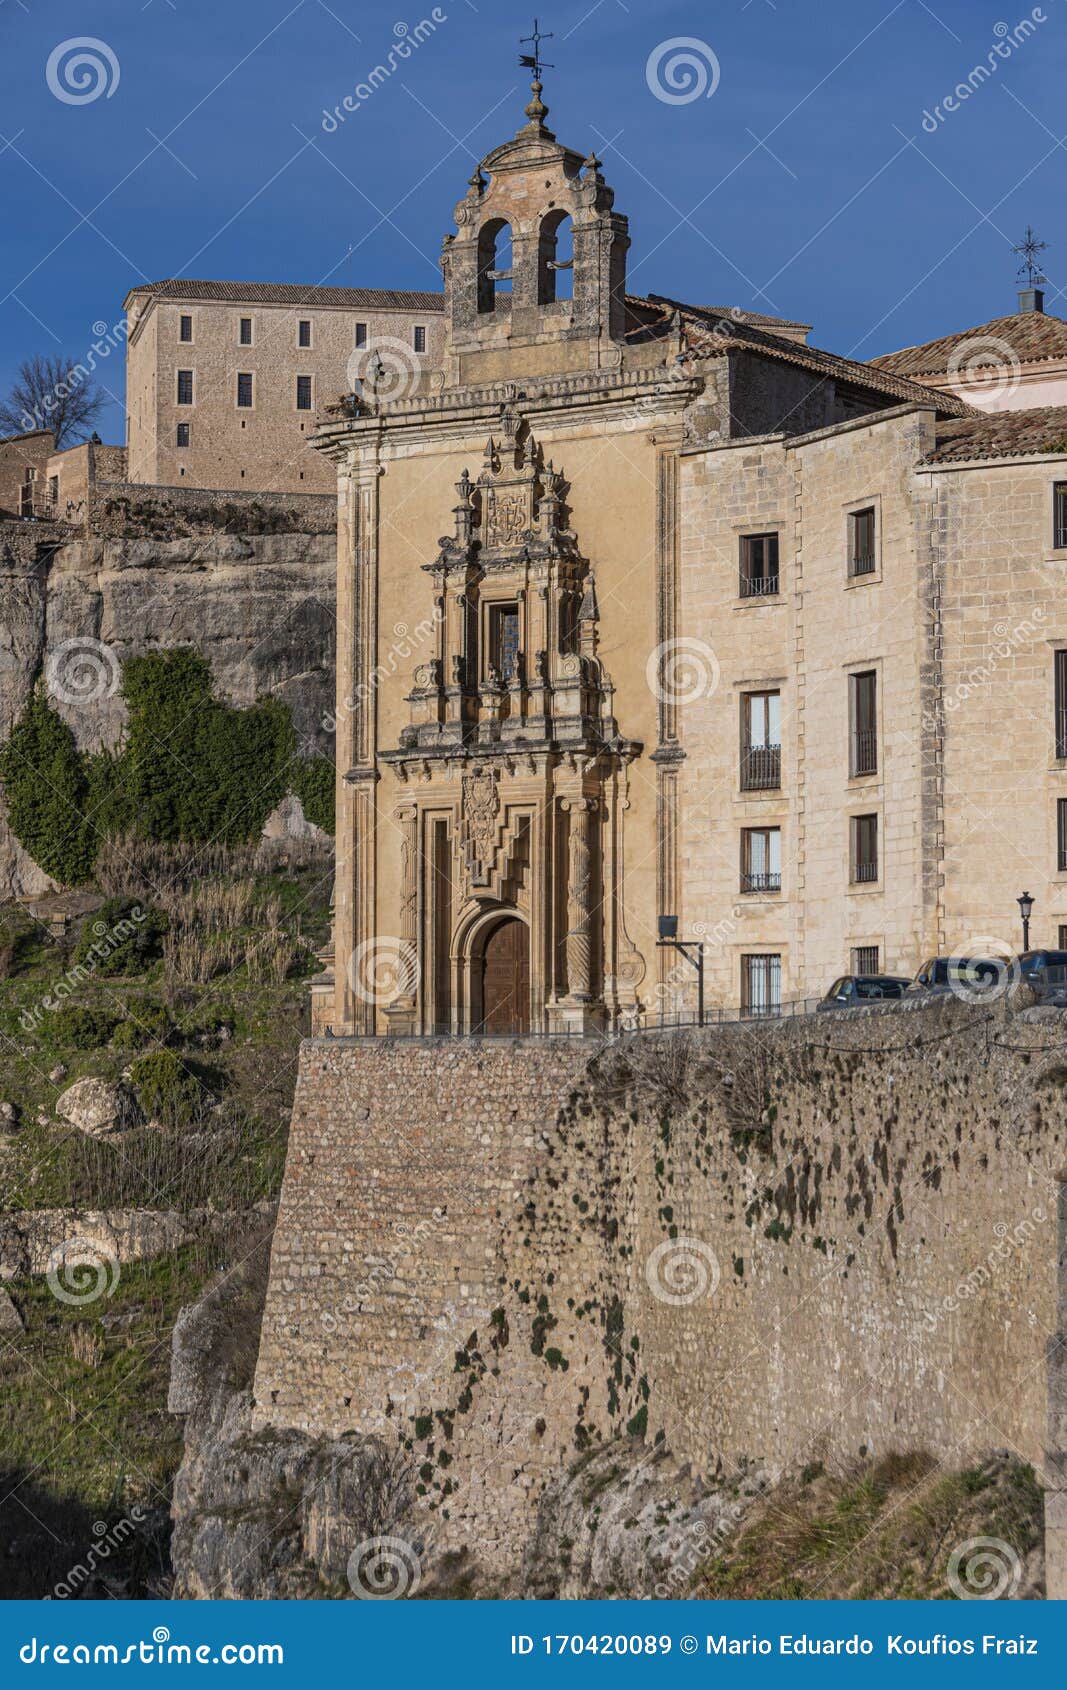 convent of san pablo at the top of the sickles of the huecar river. europe spain city of cuenca